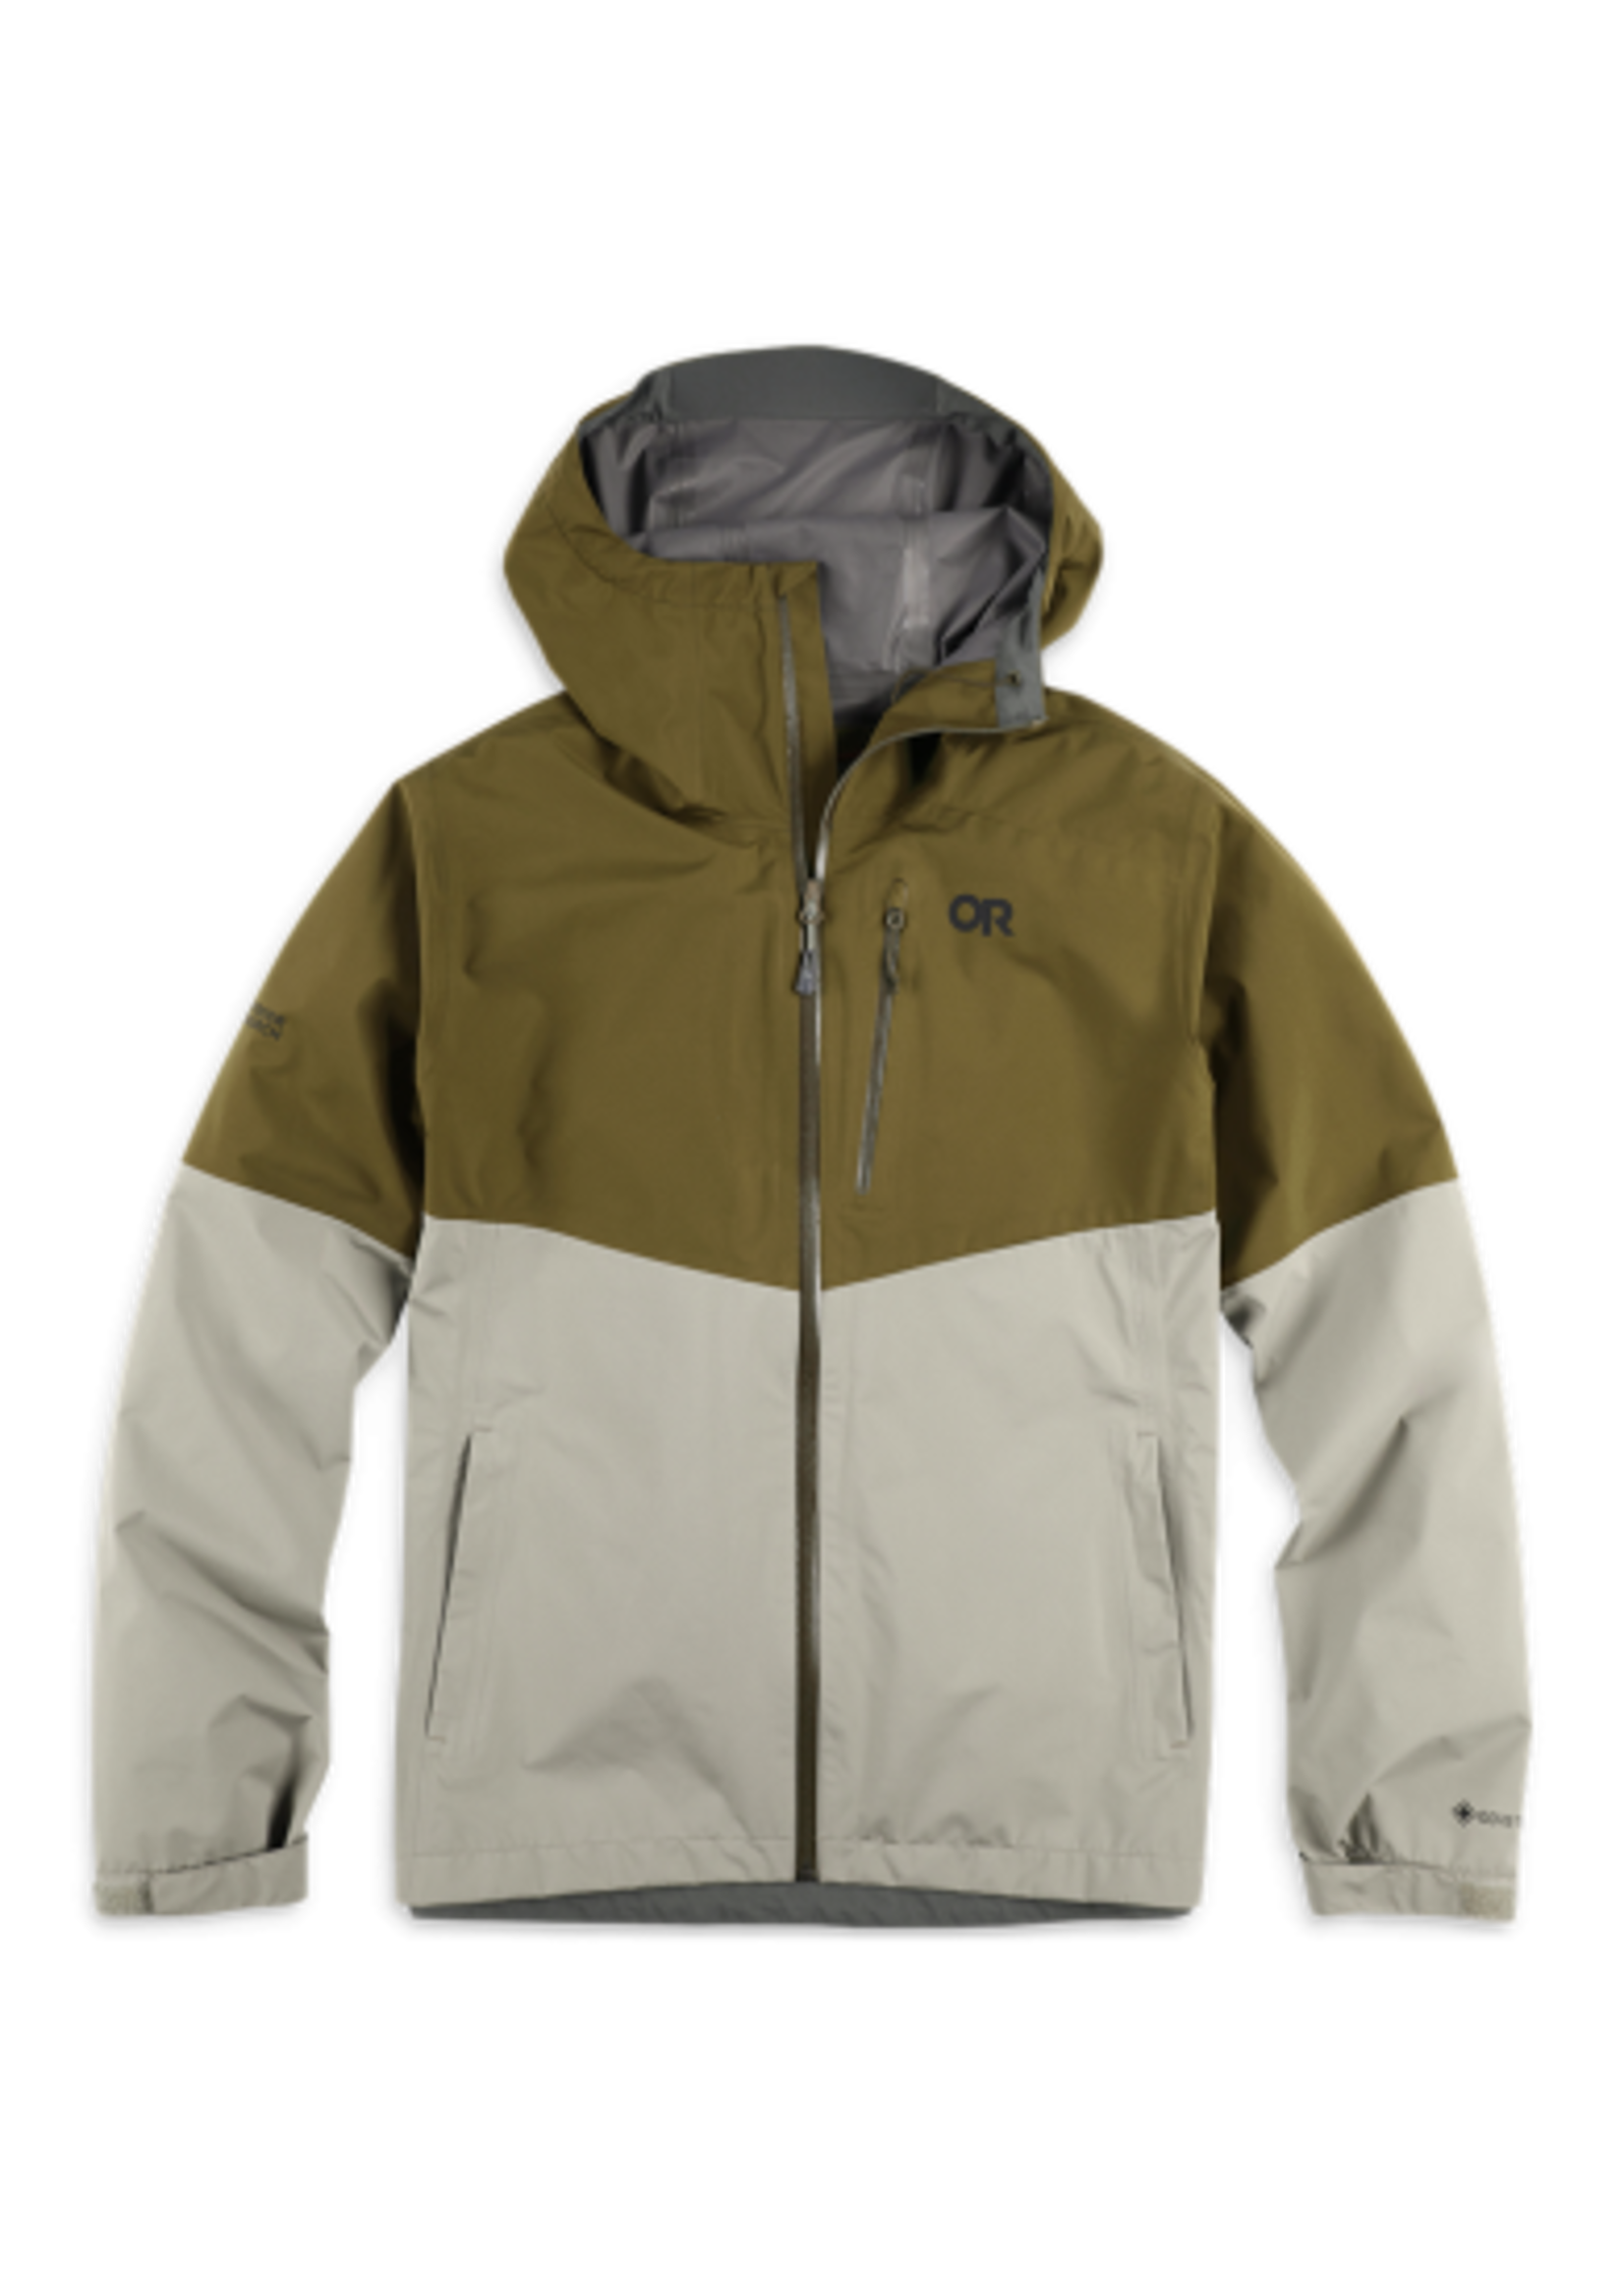 OUTDOOR RESEARCH Manteau imperméable Foray II GORE-TEX®-Homme